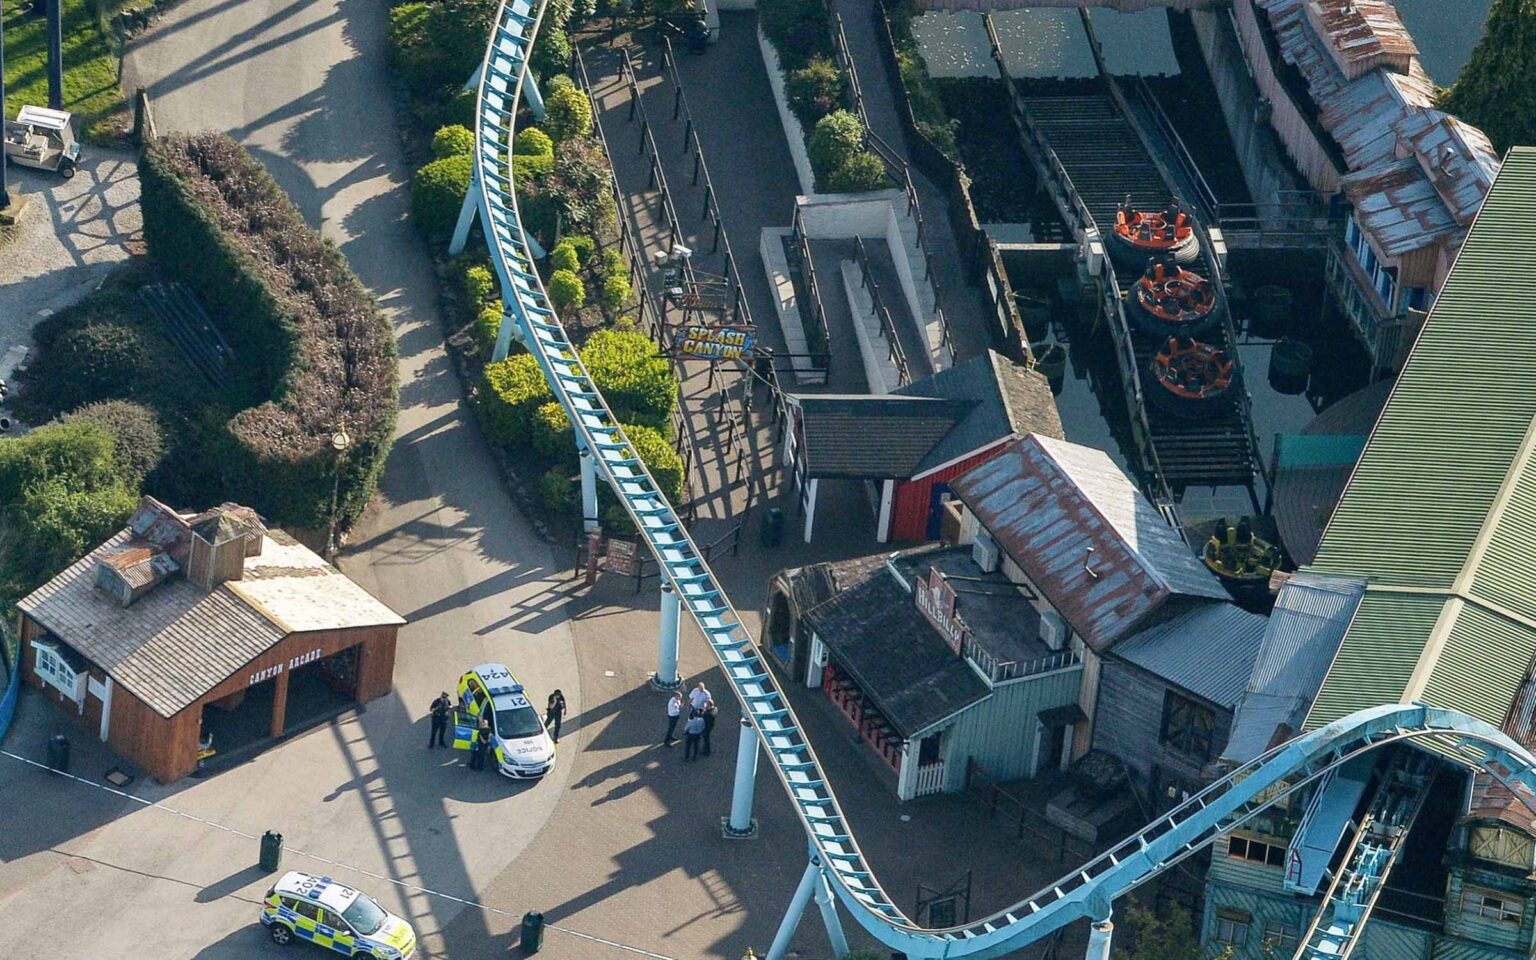 While you may be dying to go to your local amusement park in quarantine, rethink that idea after reading these awful theme park accidents over the years.